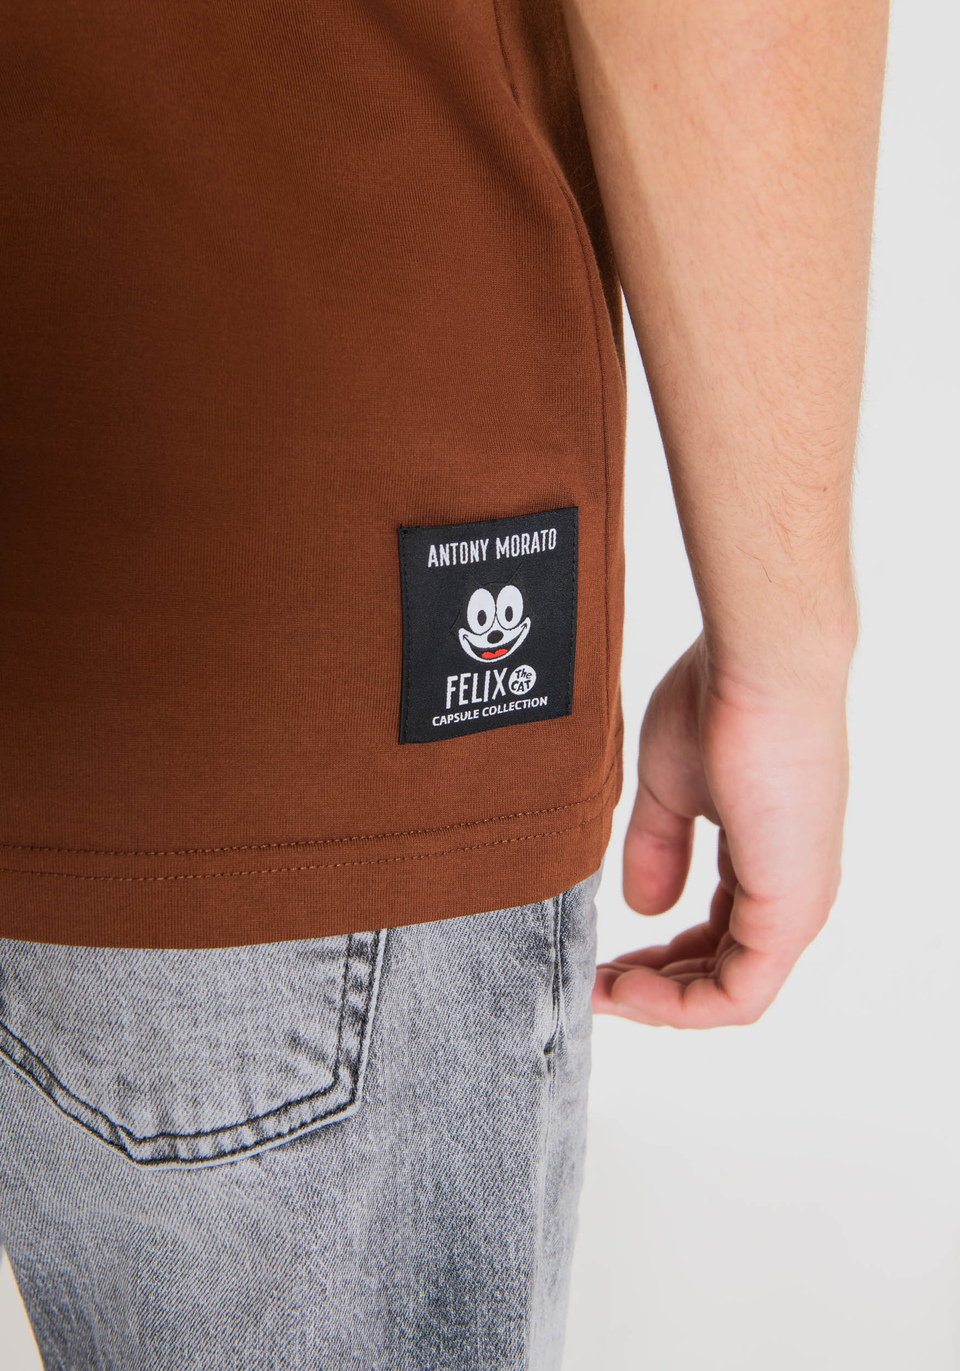 REGULAR-FIT T-SHIRT IN PURE COTTON WITH FELIX THE CAT PRINT - Antony Morato Online Shop